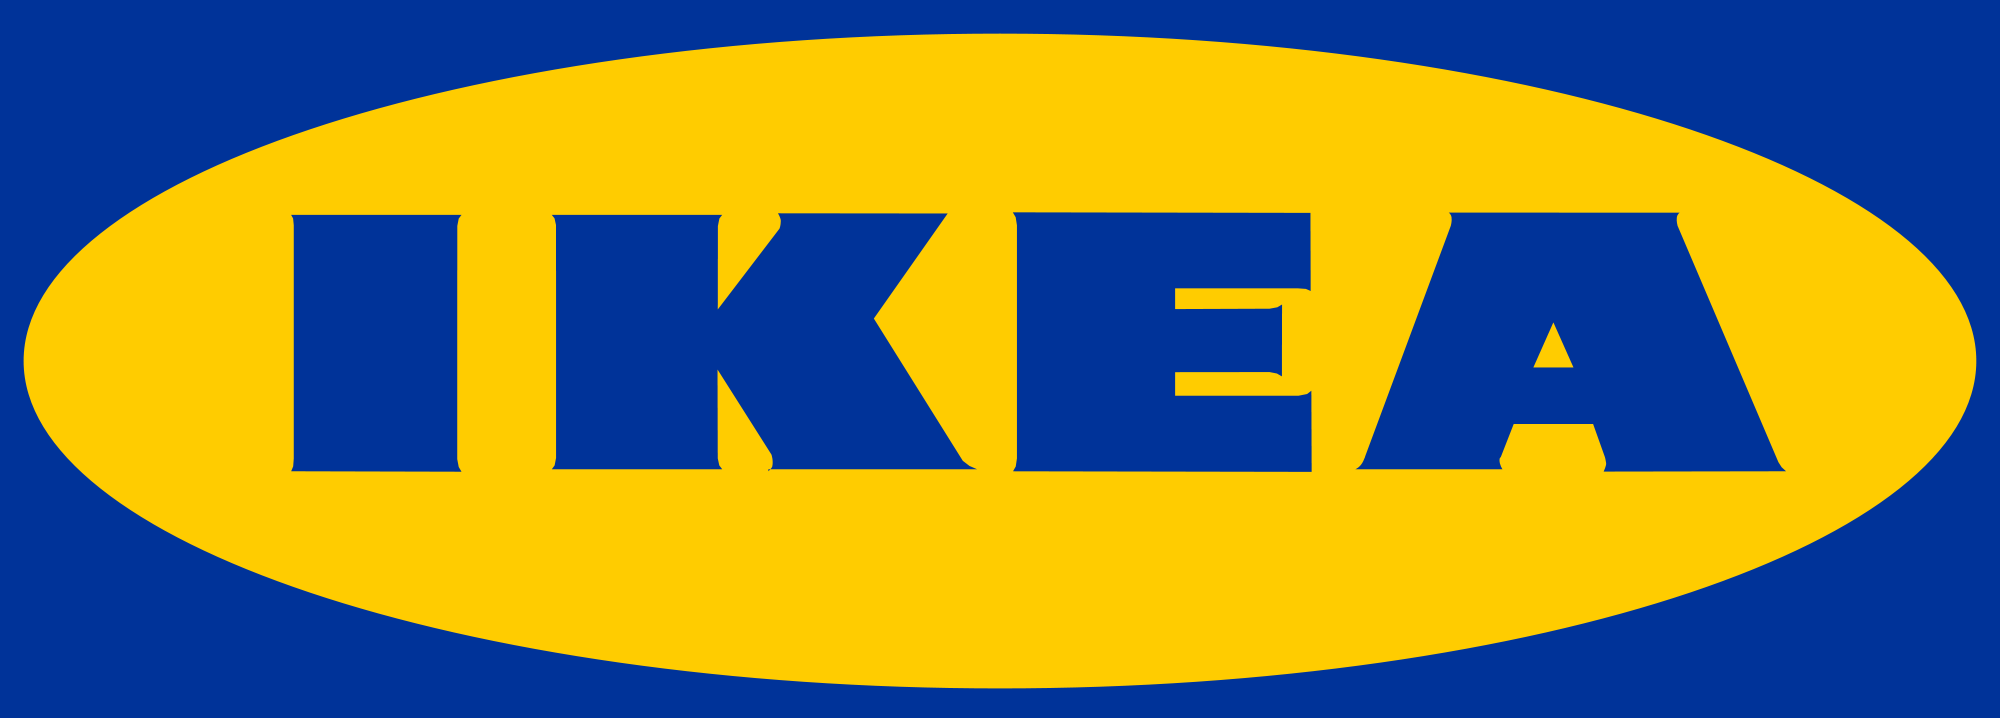 Some references Ikea